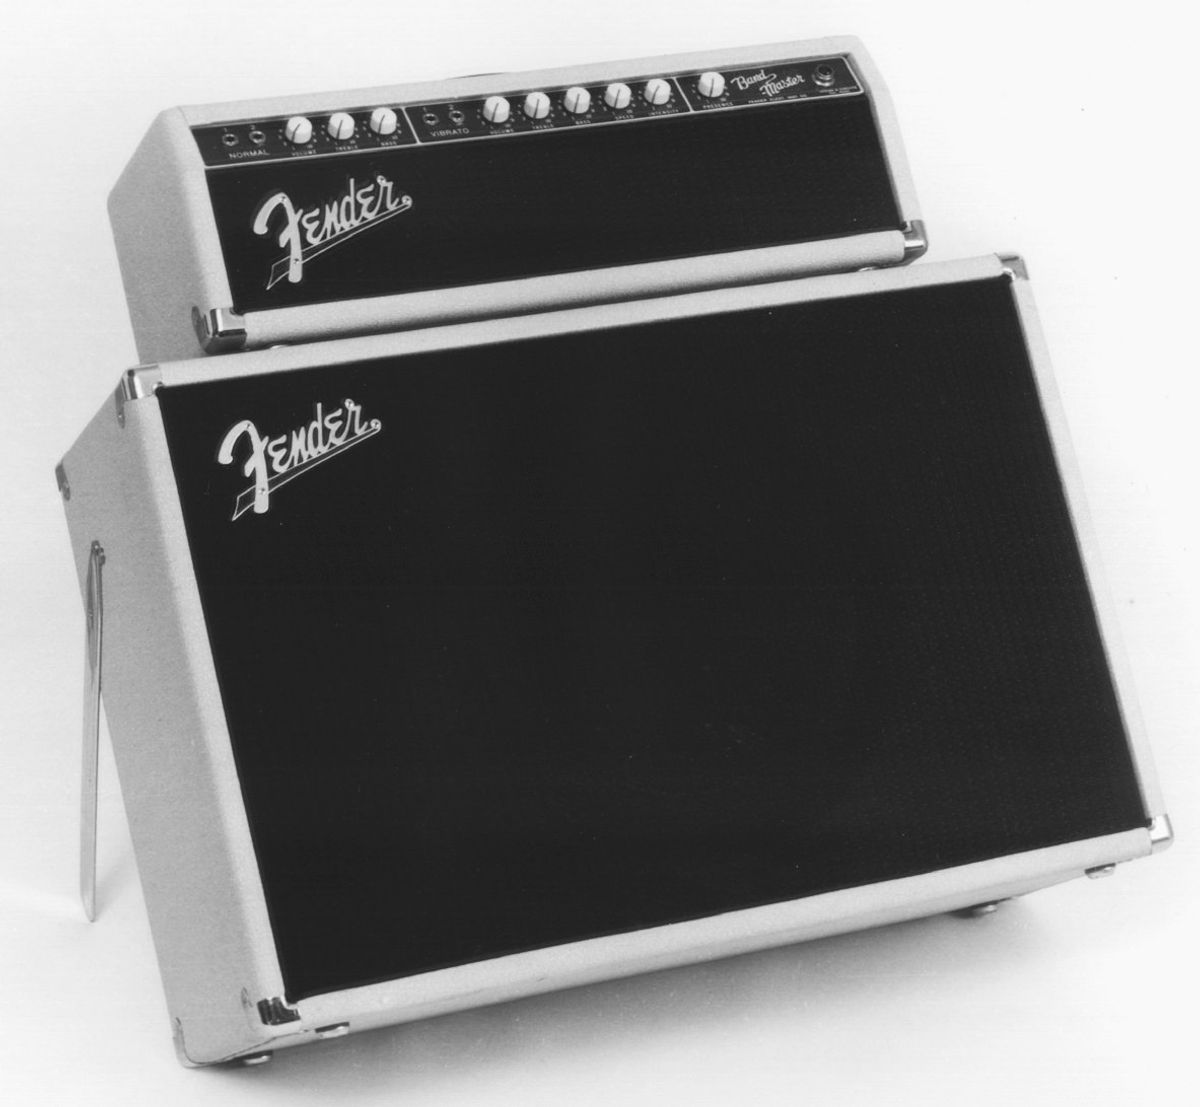 Finding the Perfect Extension Cabinet For Your Fender Amp